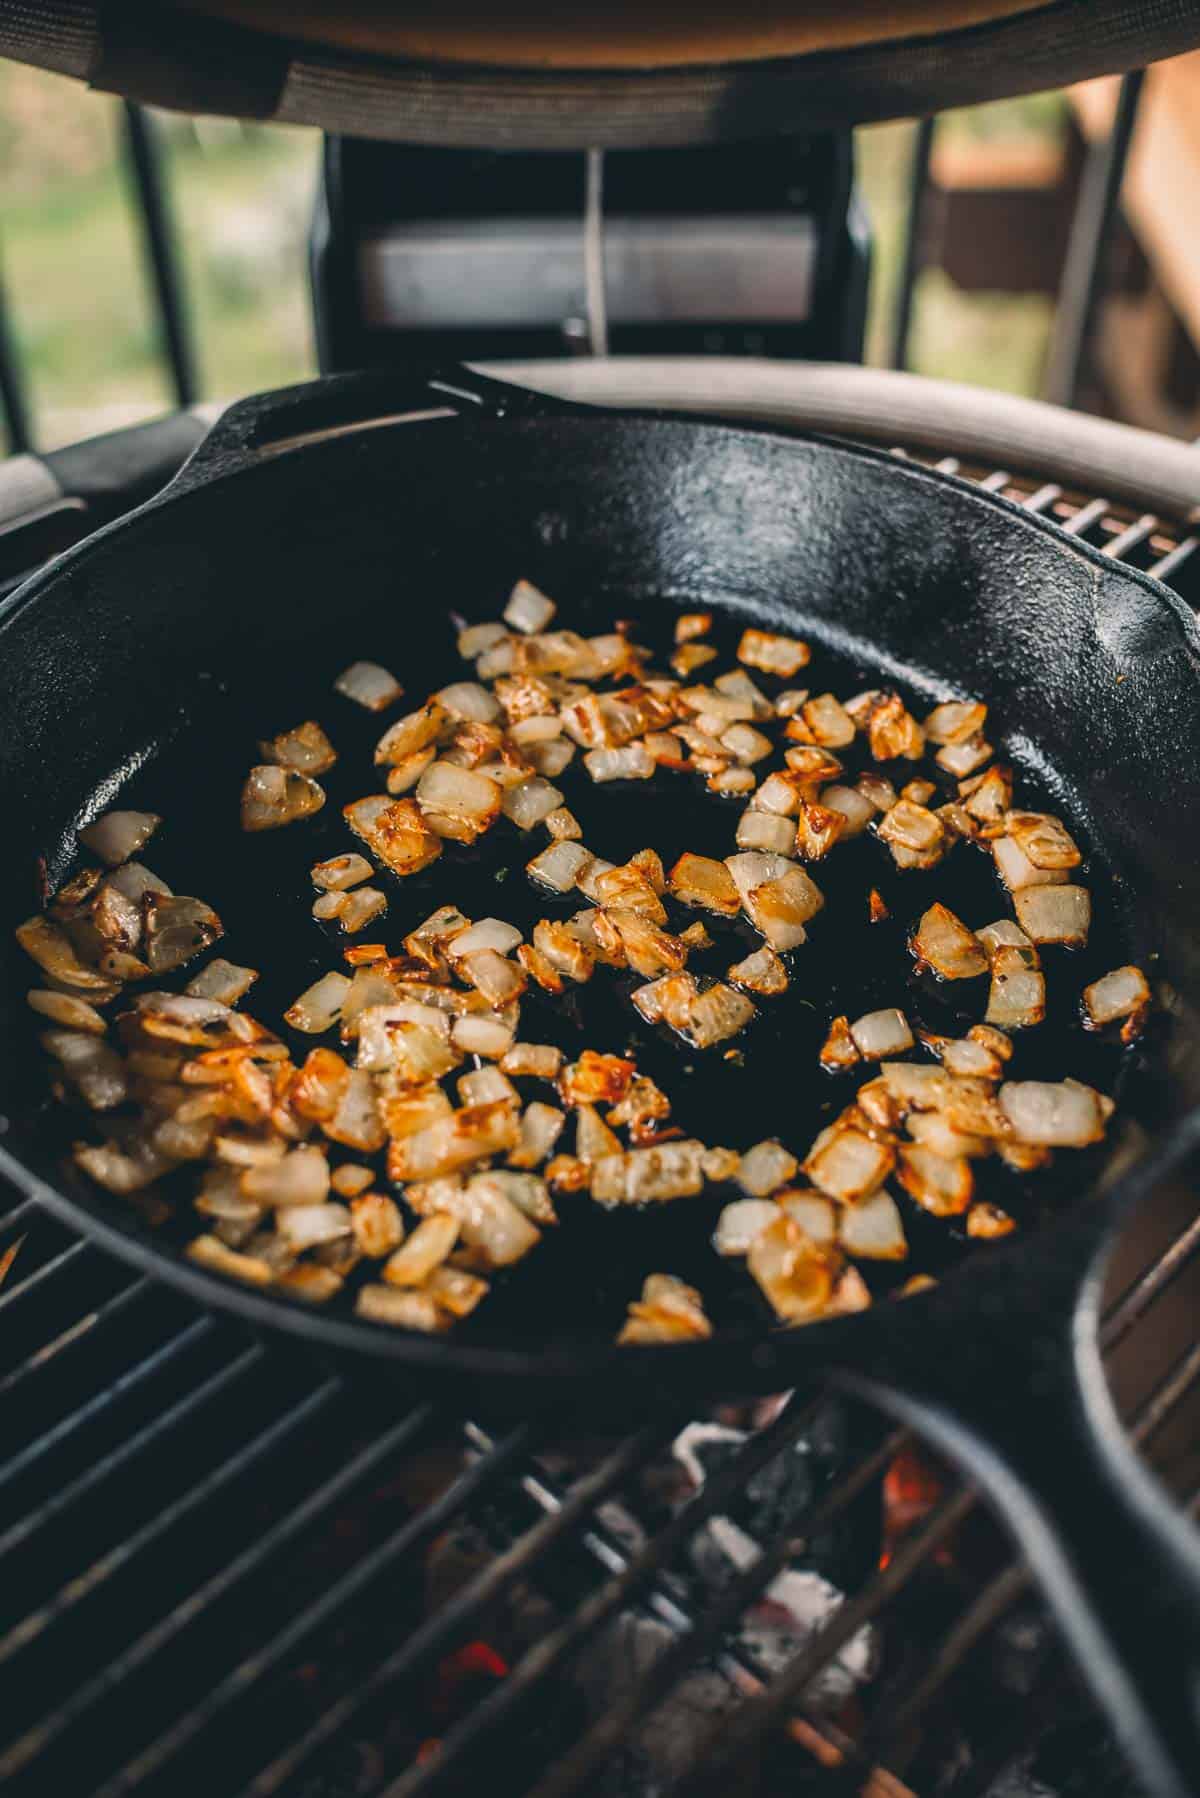 Chopped onions being sautéed in a black cast-iron skillet on the grill.